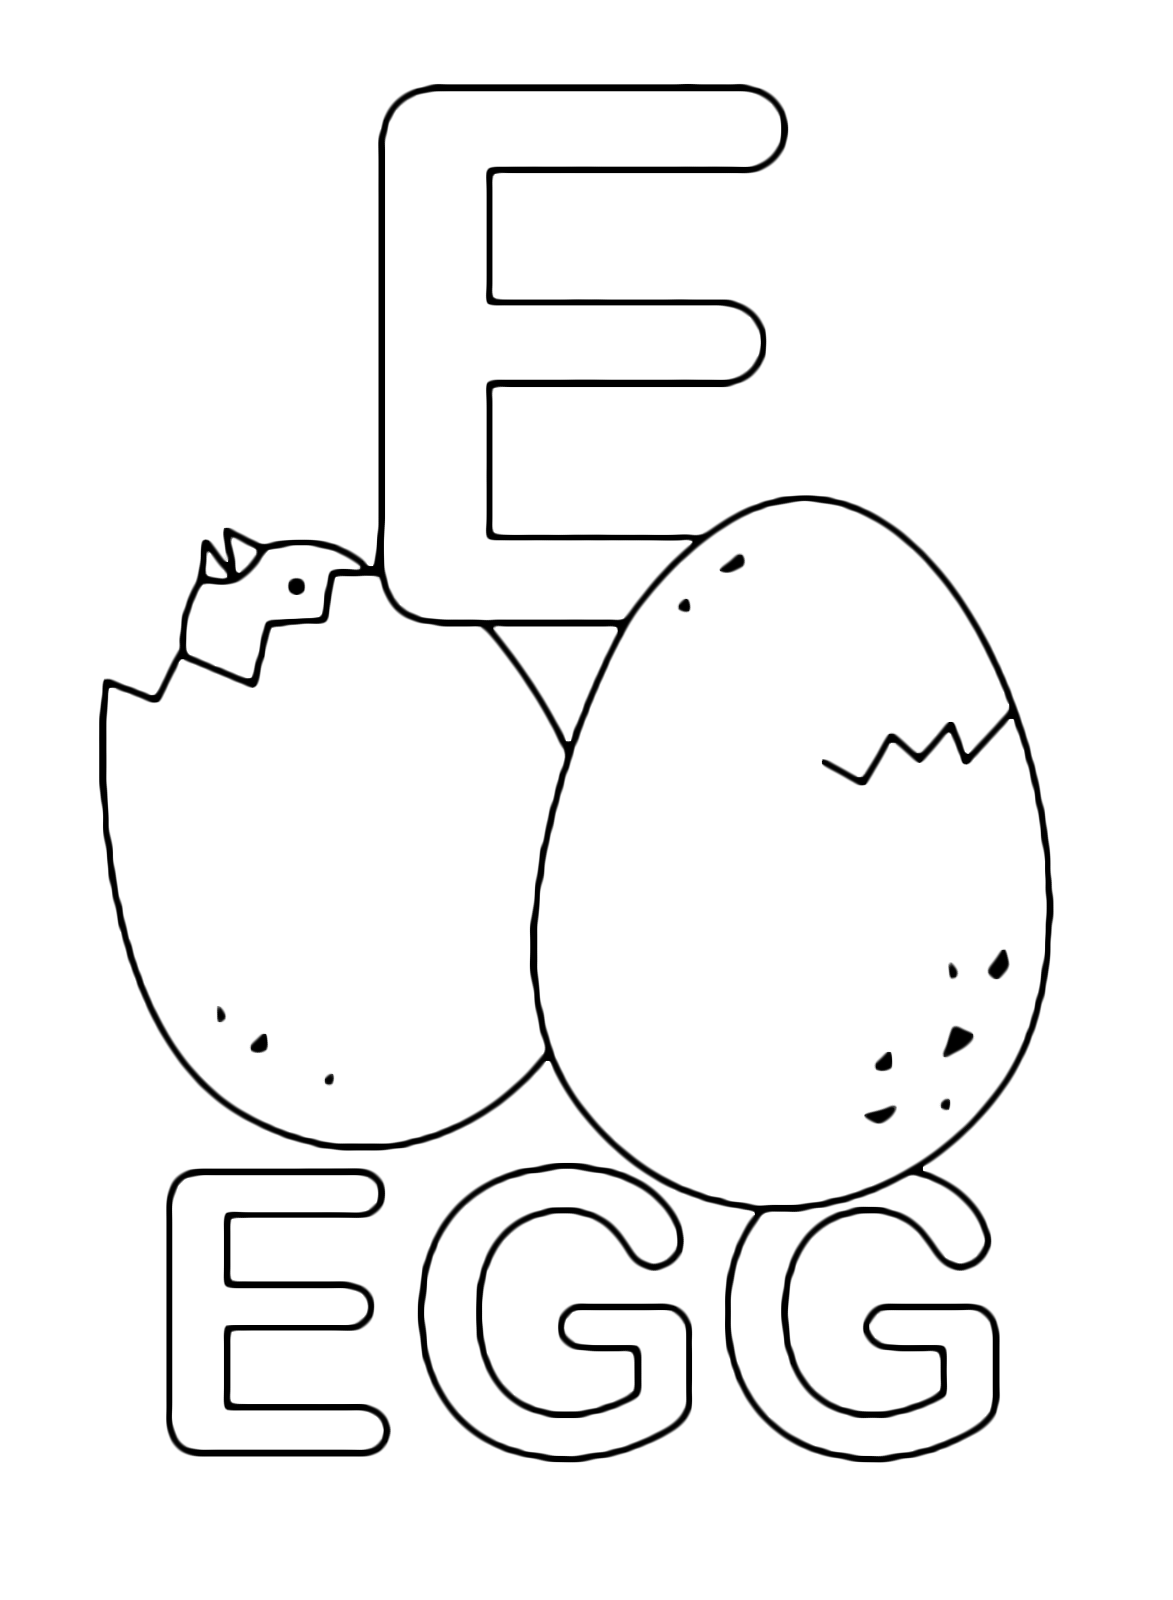 Letters and numbers - E for egg uppercase letter